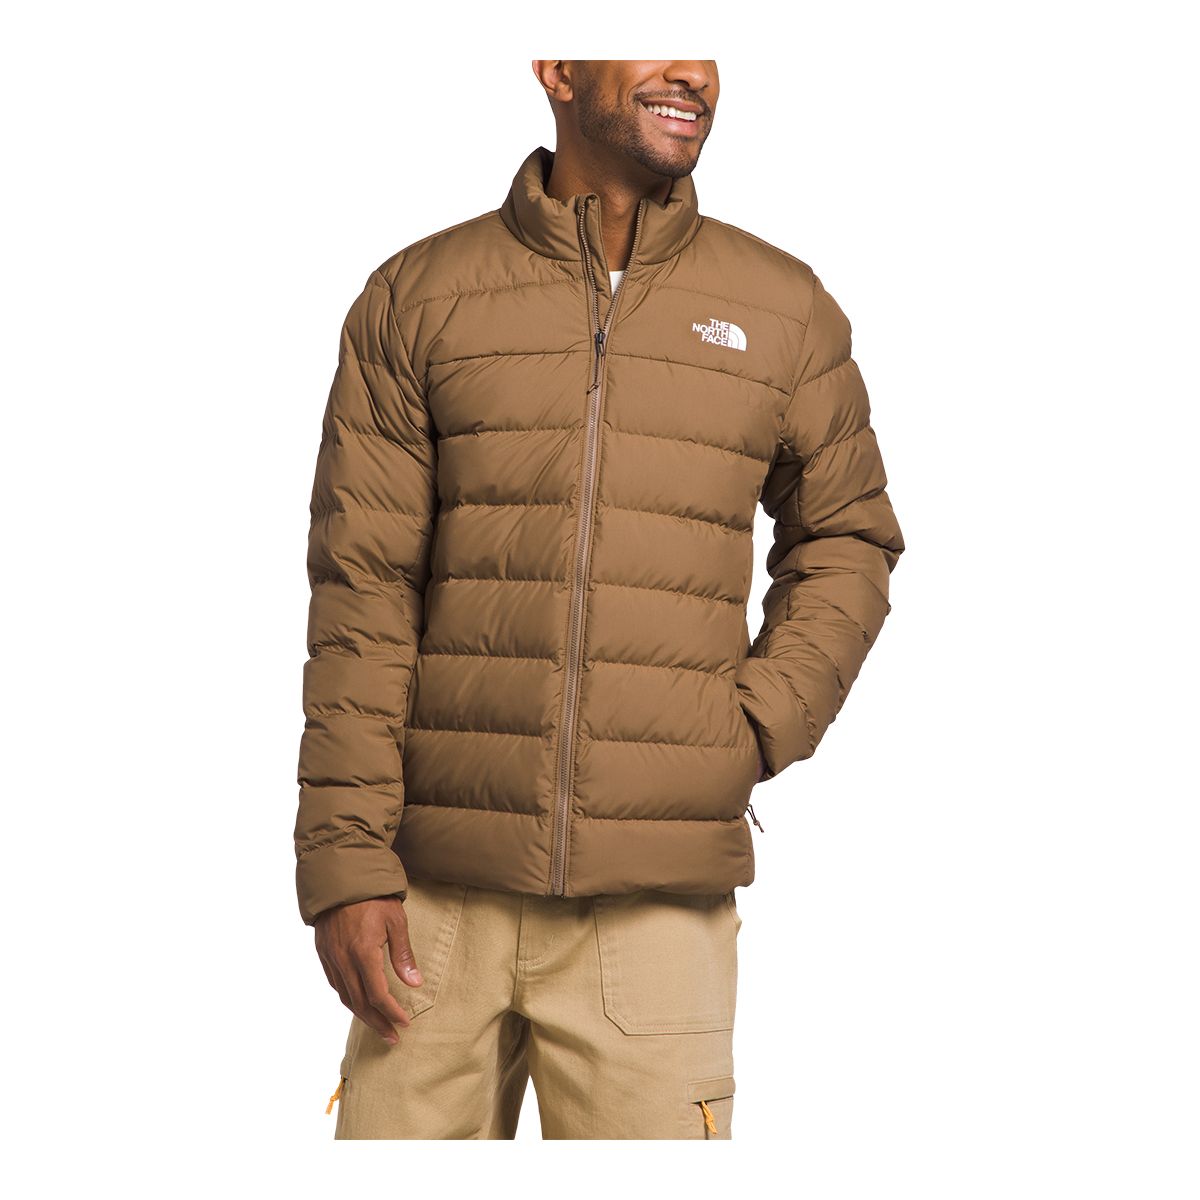 Image of The North Face Men's Aconcagua Jacket